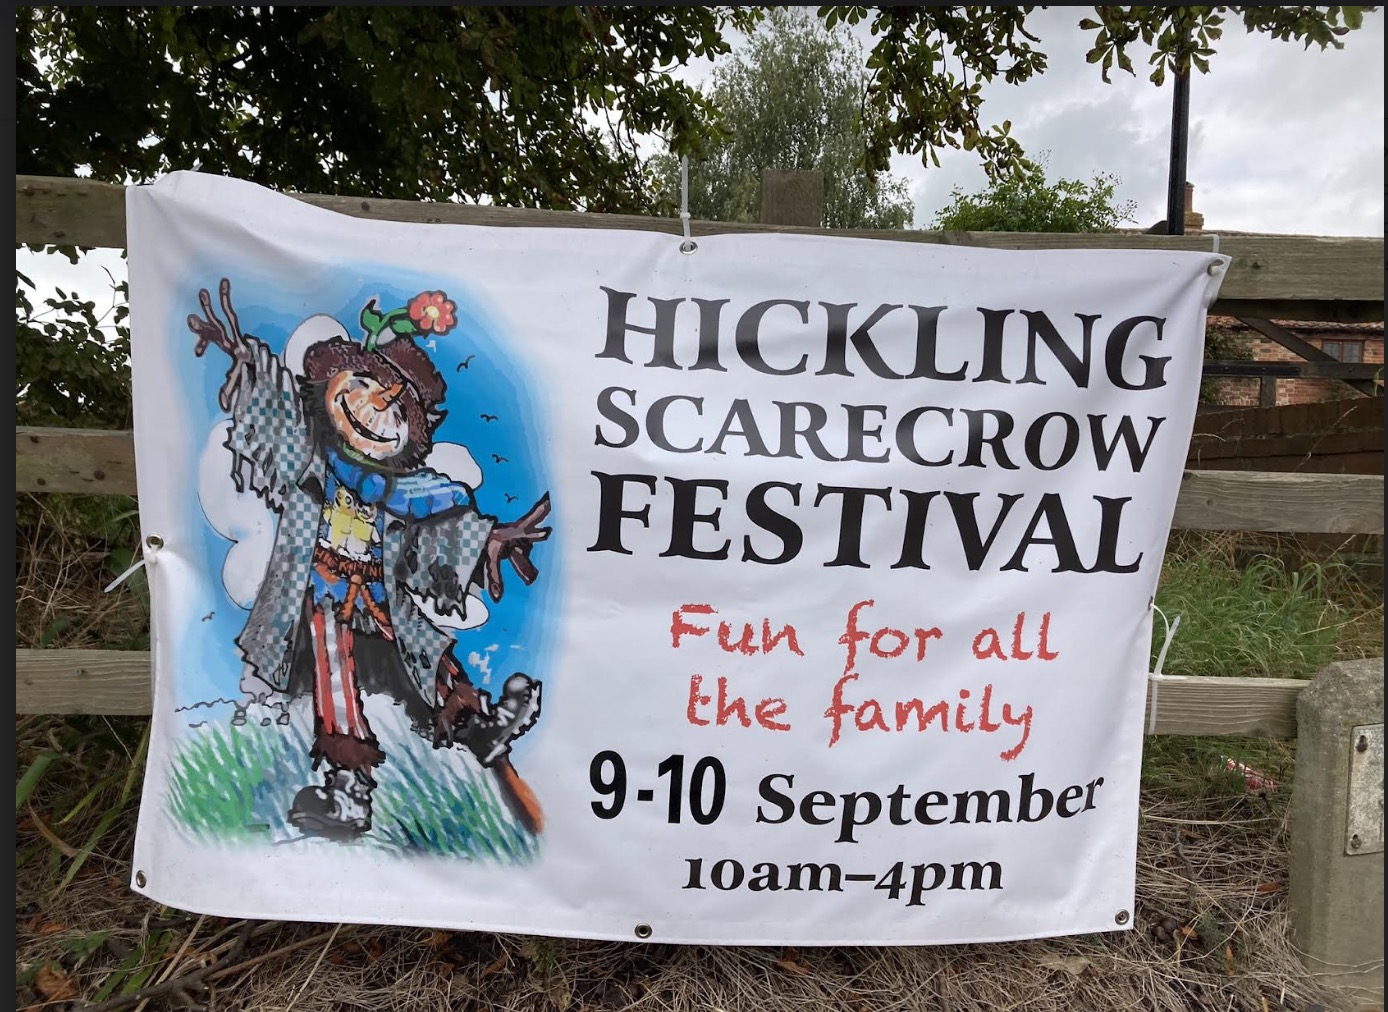 Hickling Scarecrow Festival 2023 is on next weekend 